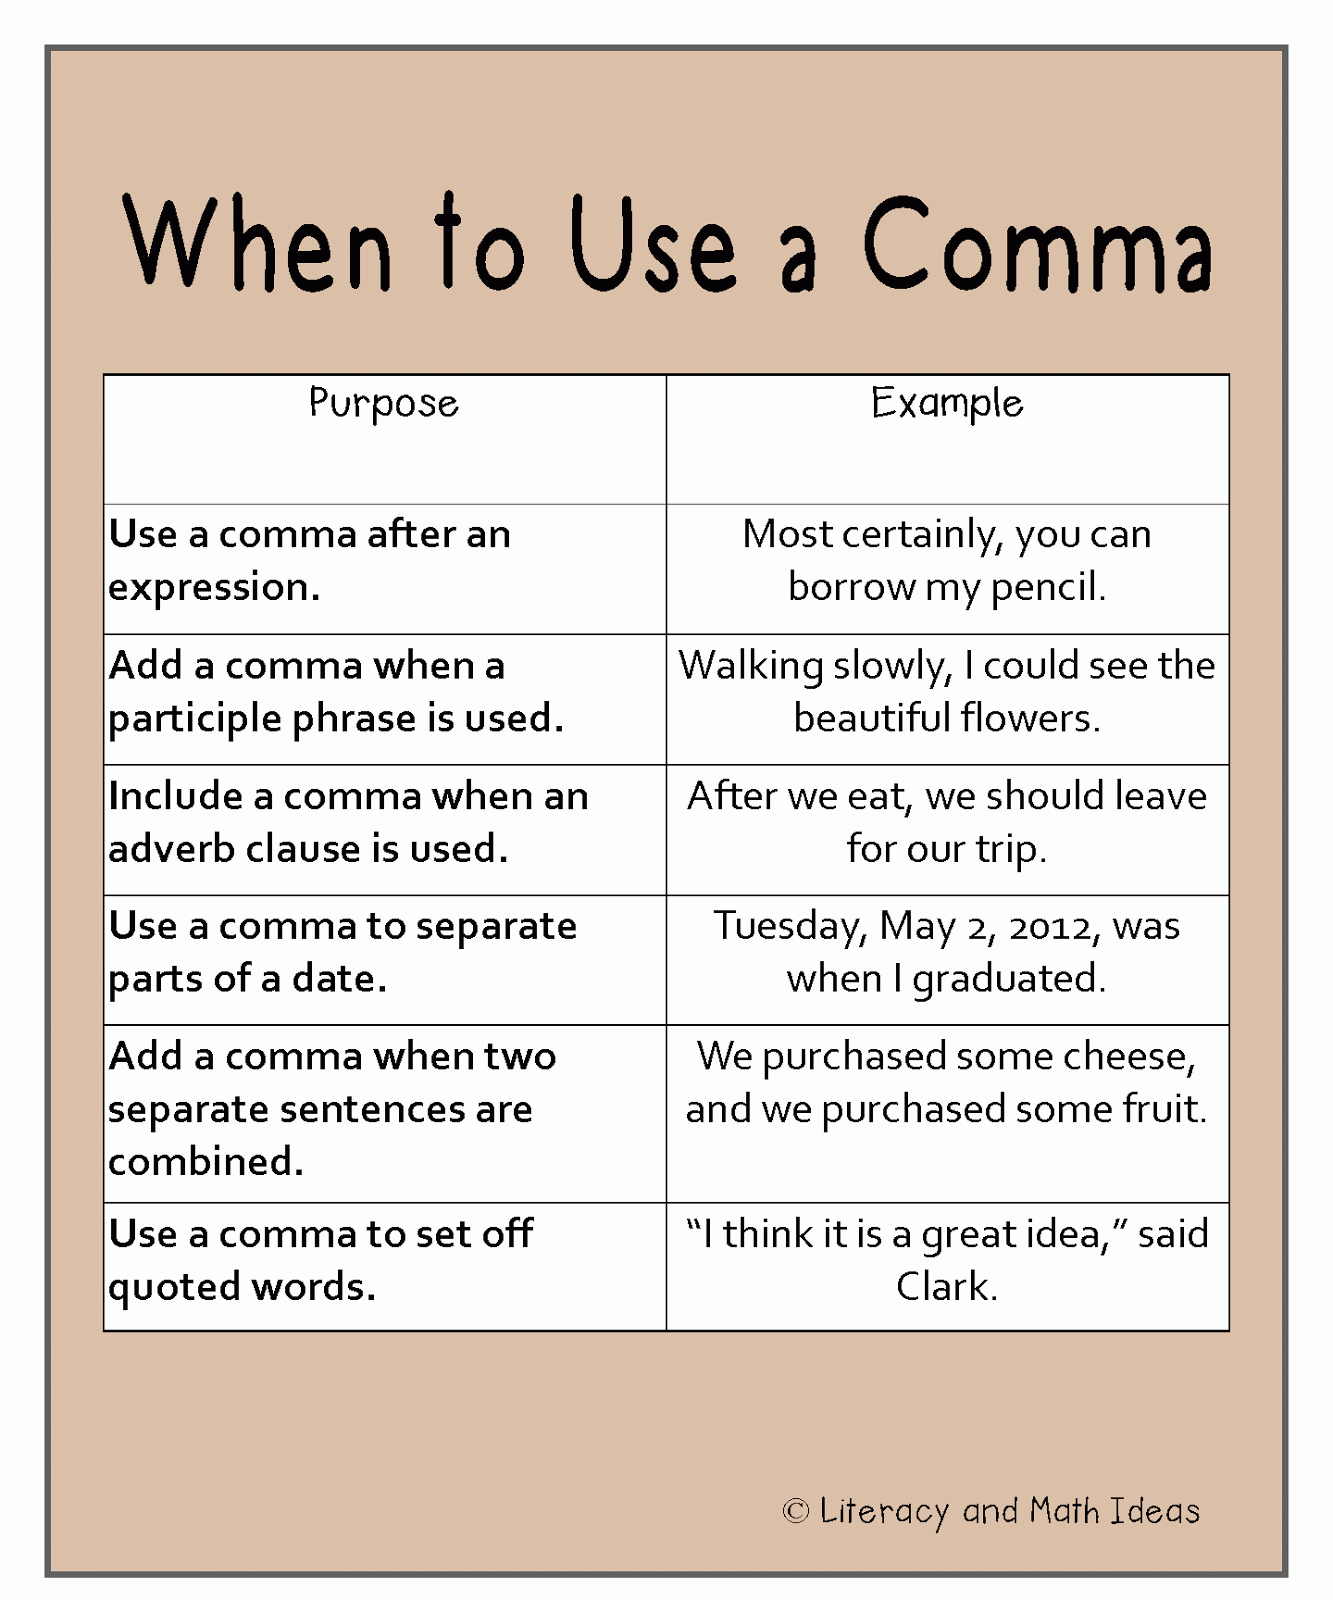 Literacy & Math Ideas: Free--When to Use a Comma Reference Chart